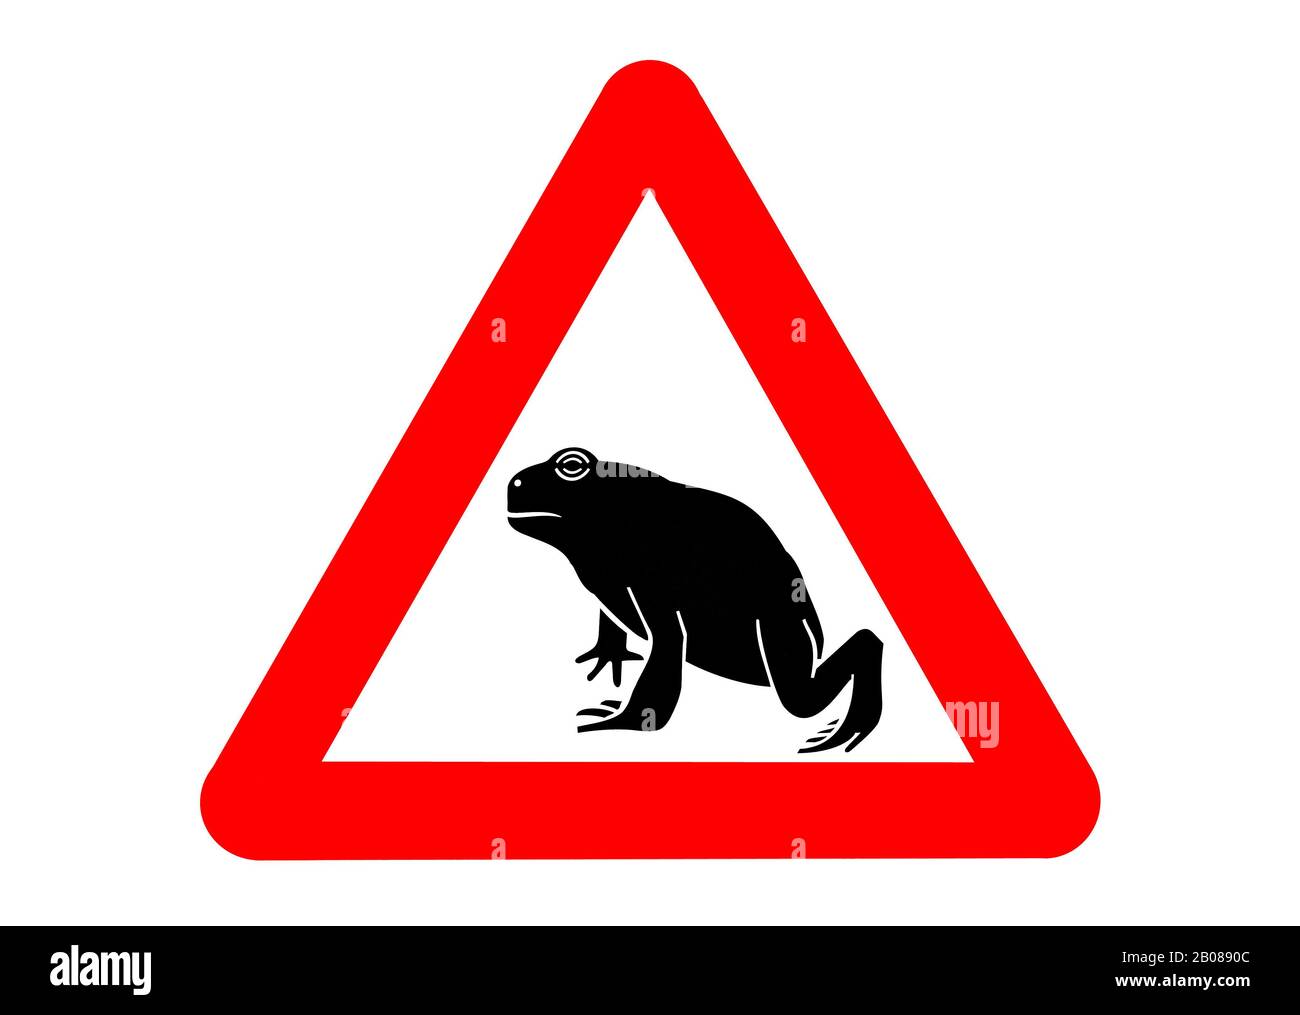 Warning sign for migrating amphibians / toads crossing the road during annual migration in the spring against white background Stock Photo